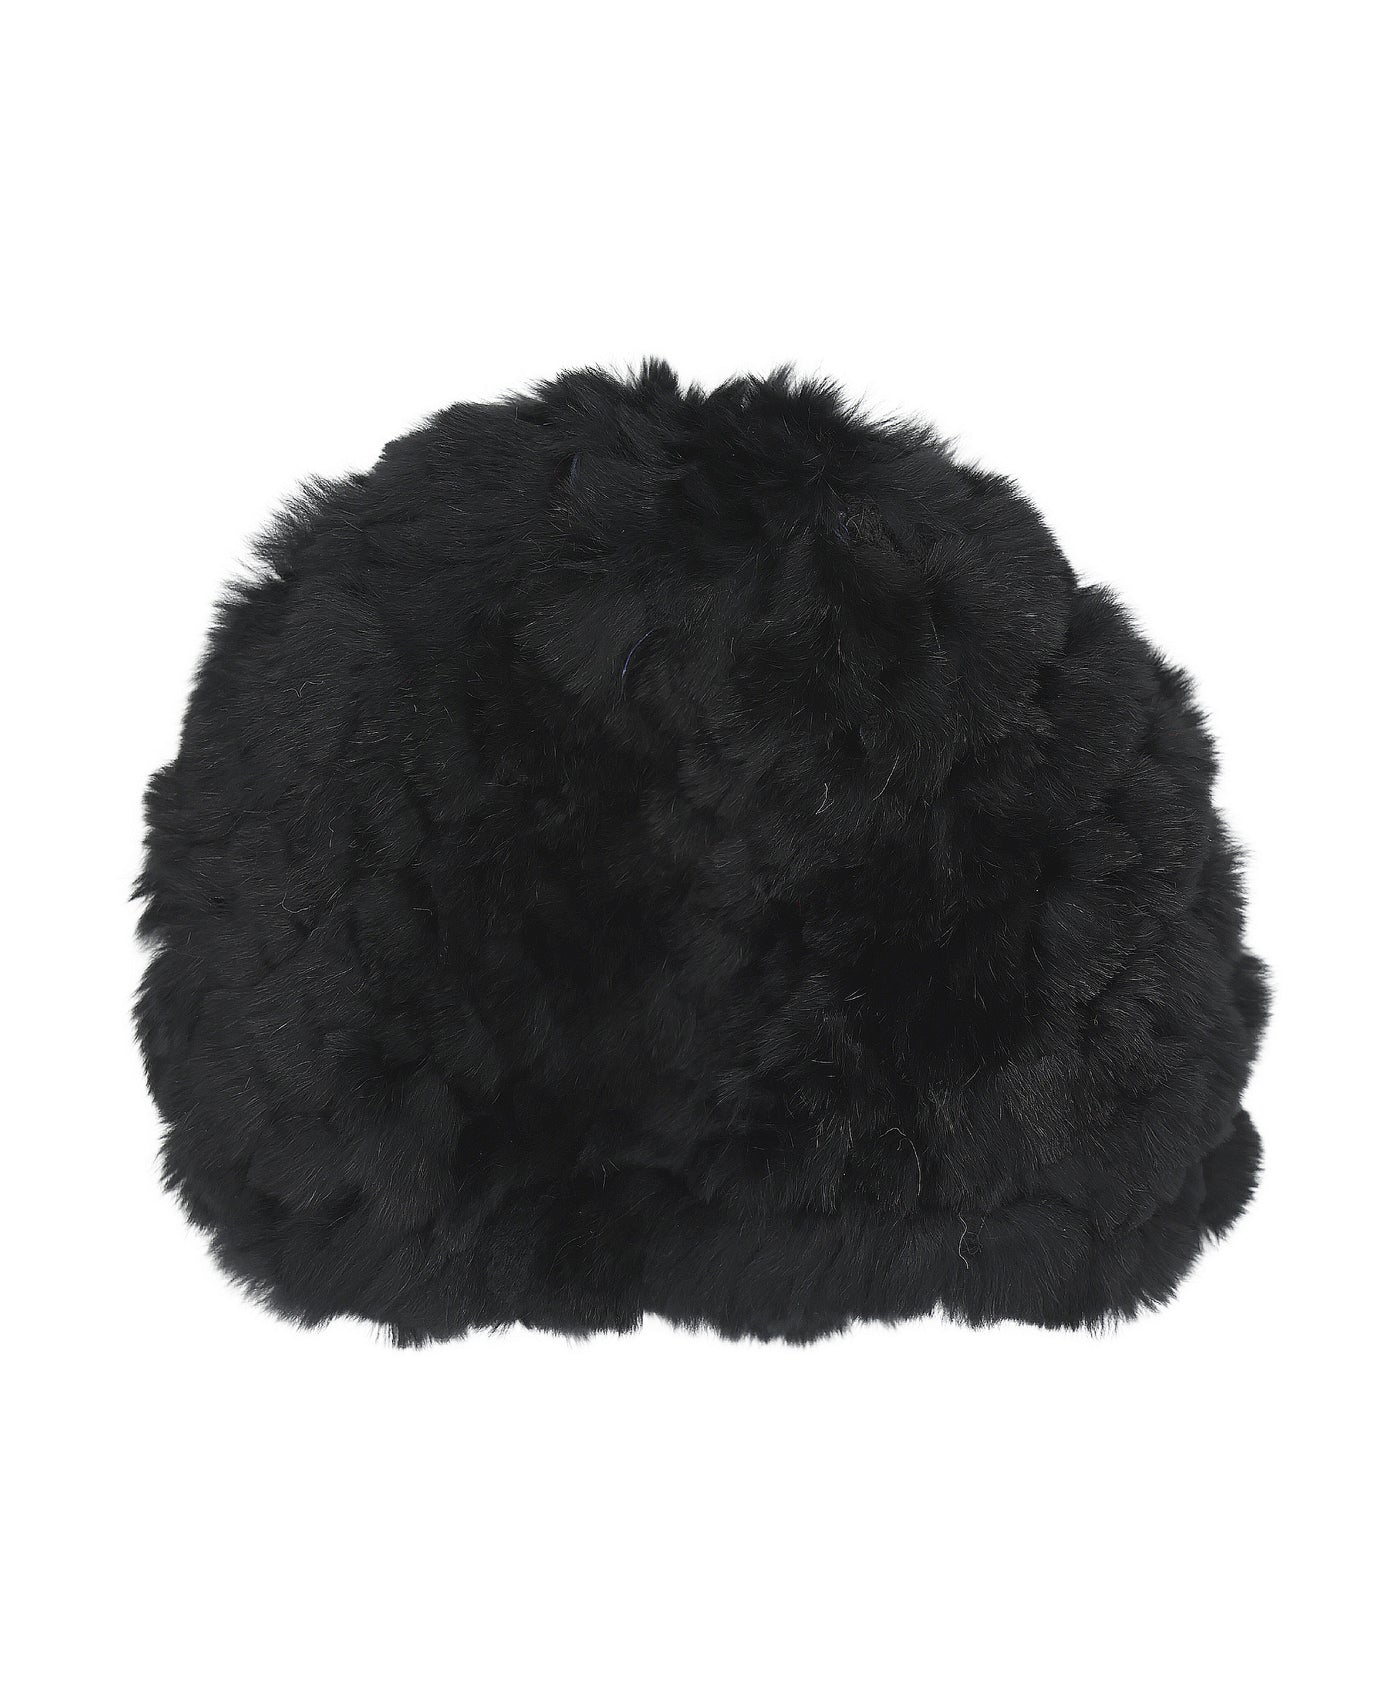 Knitted Fur Hat image 1